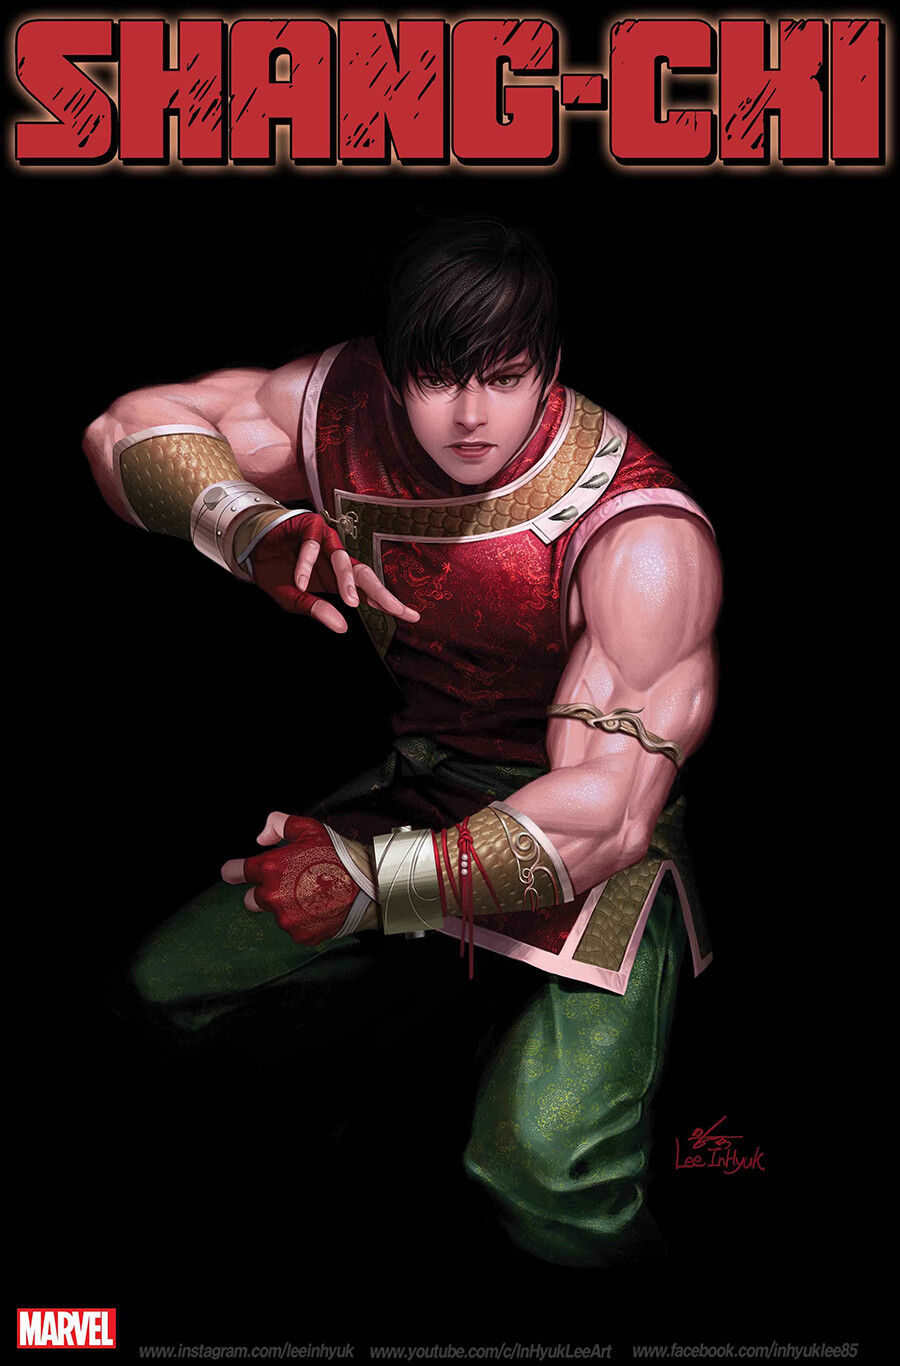 https://www.comicbookmovie.com/comics/marvel_comics/shang-chi-braces-himself-for-his-most-dangerous-battle-yet-in-inhyuk-lees-shang-chi-1-cover-a177403#gs.cgstmn